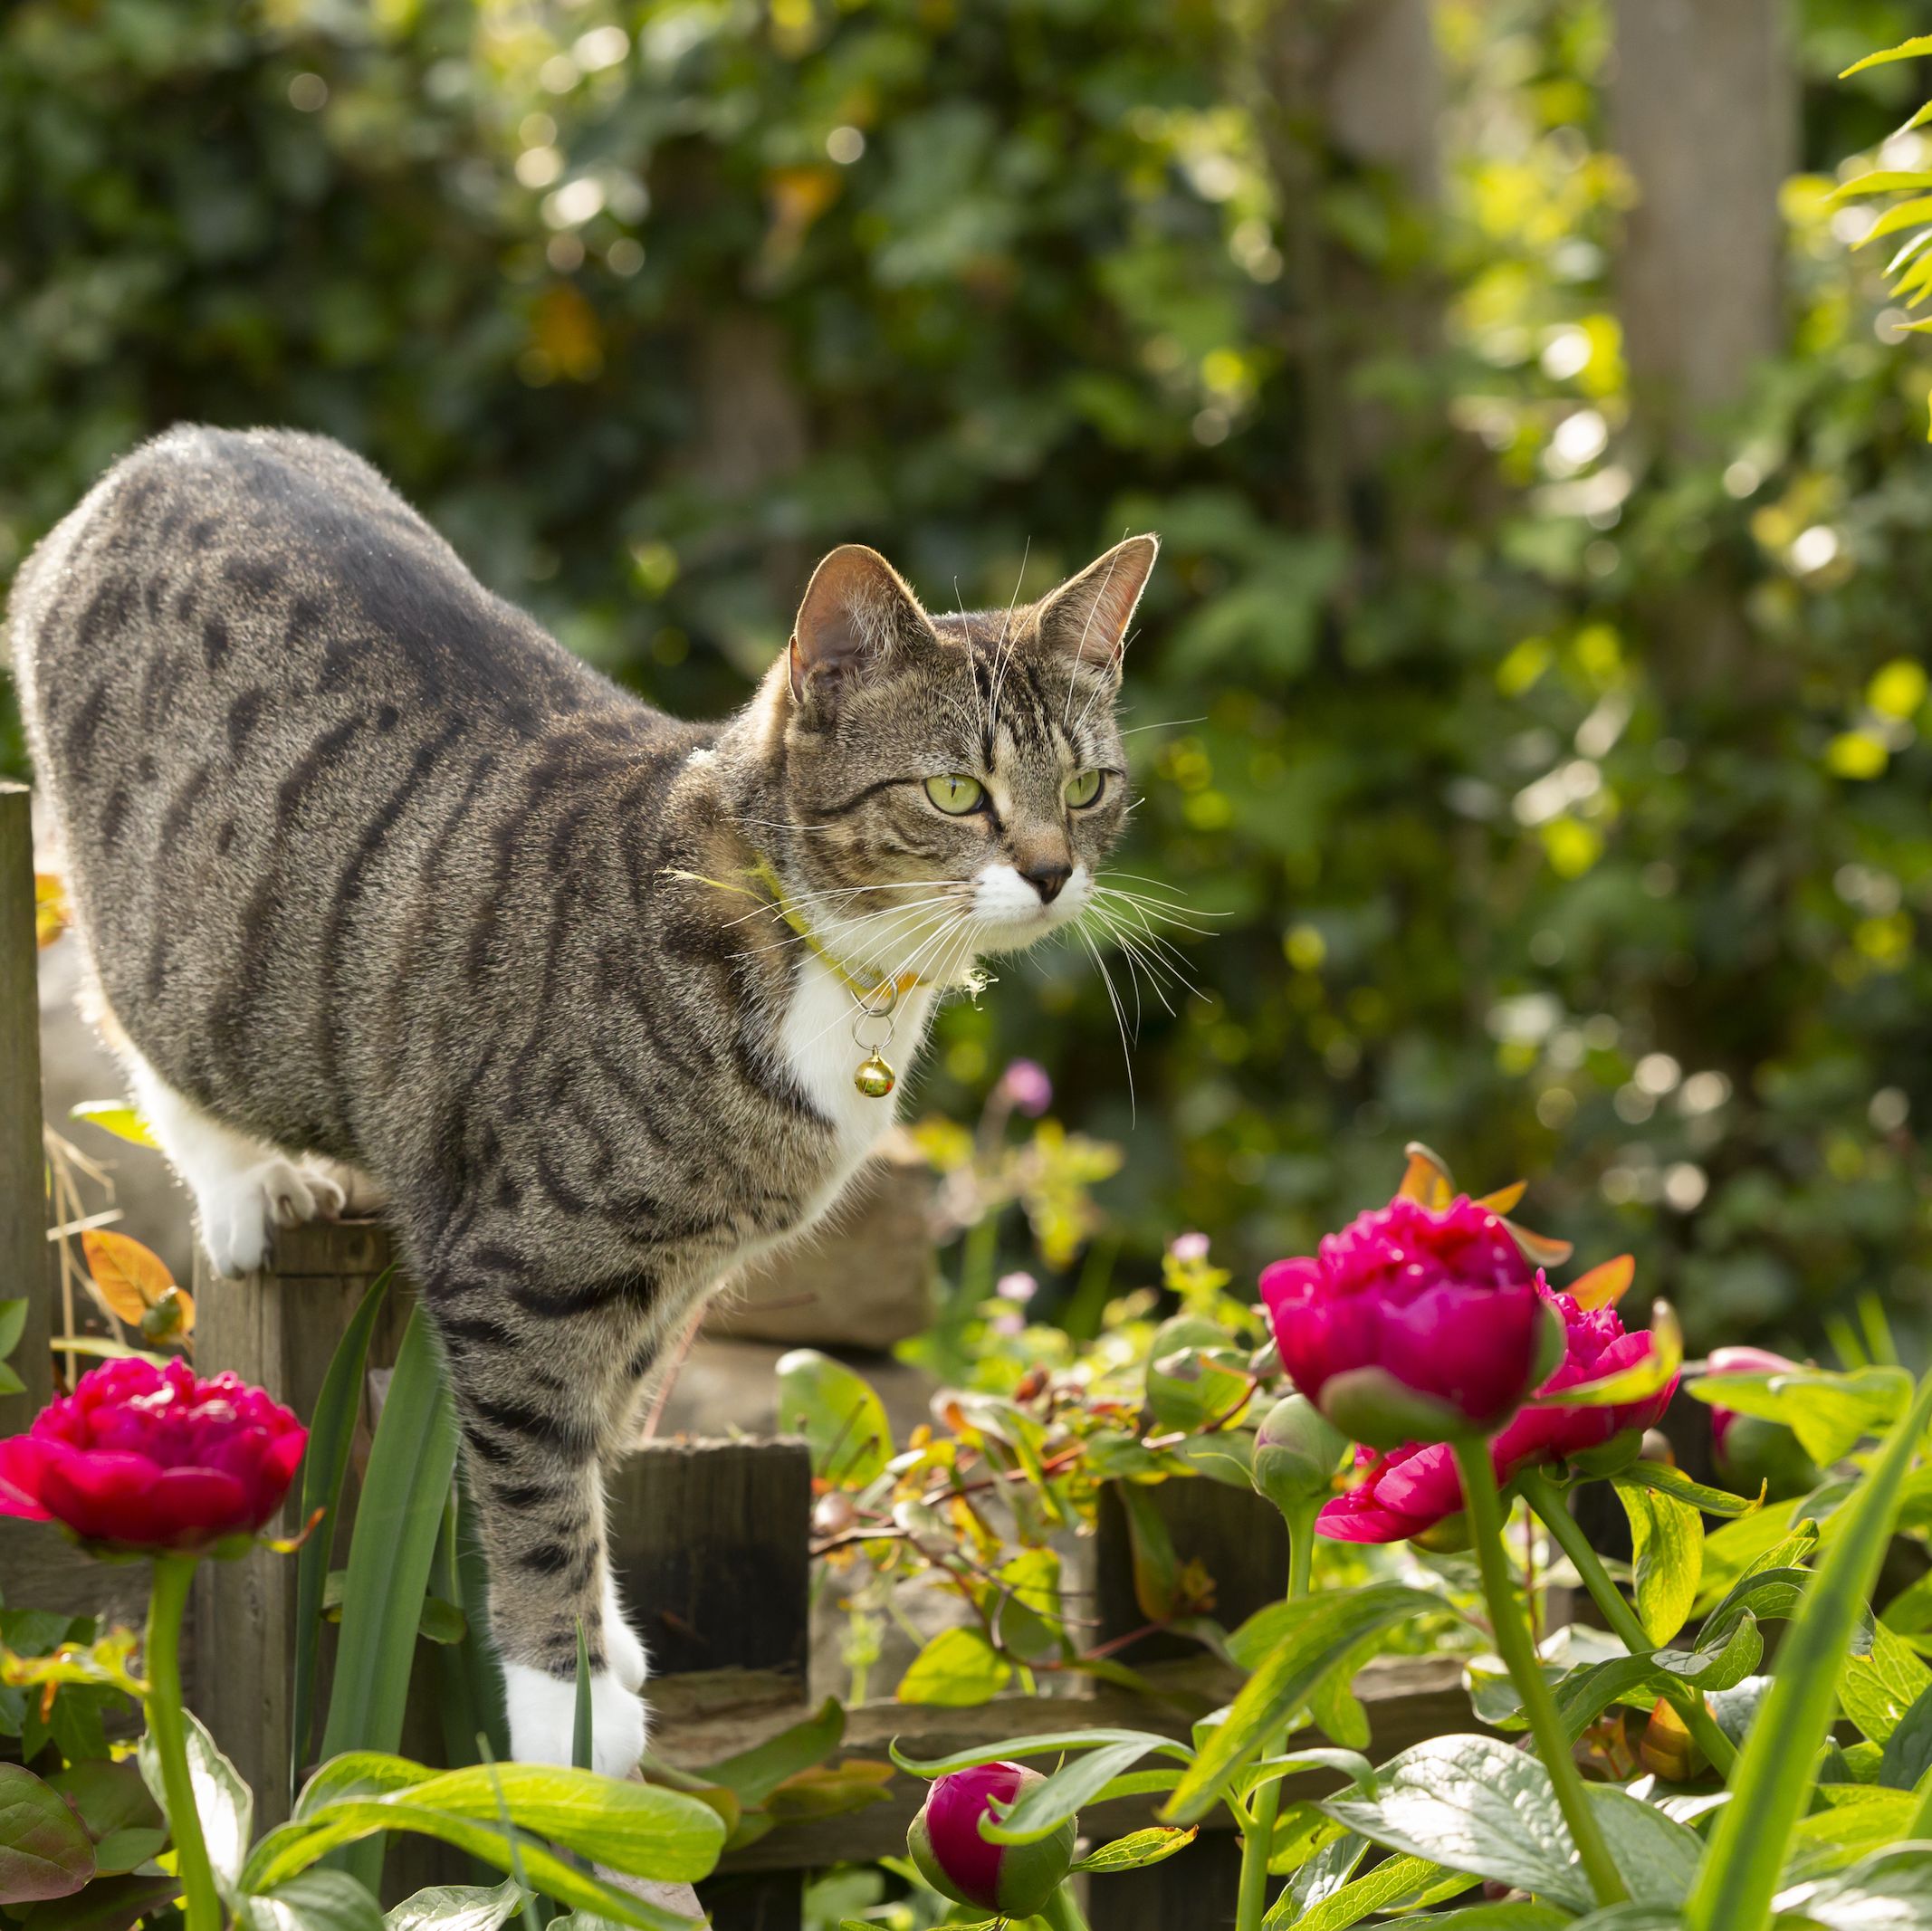 how to keep cats and dogs away from your garden